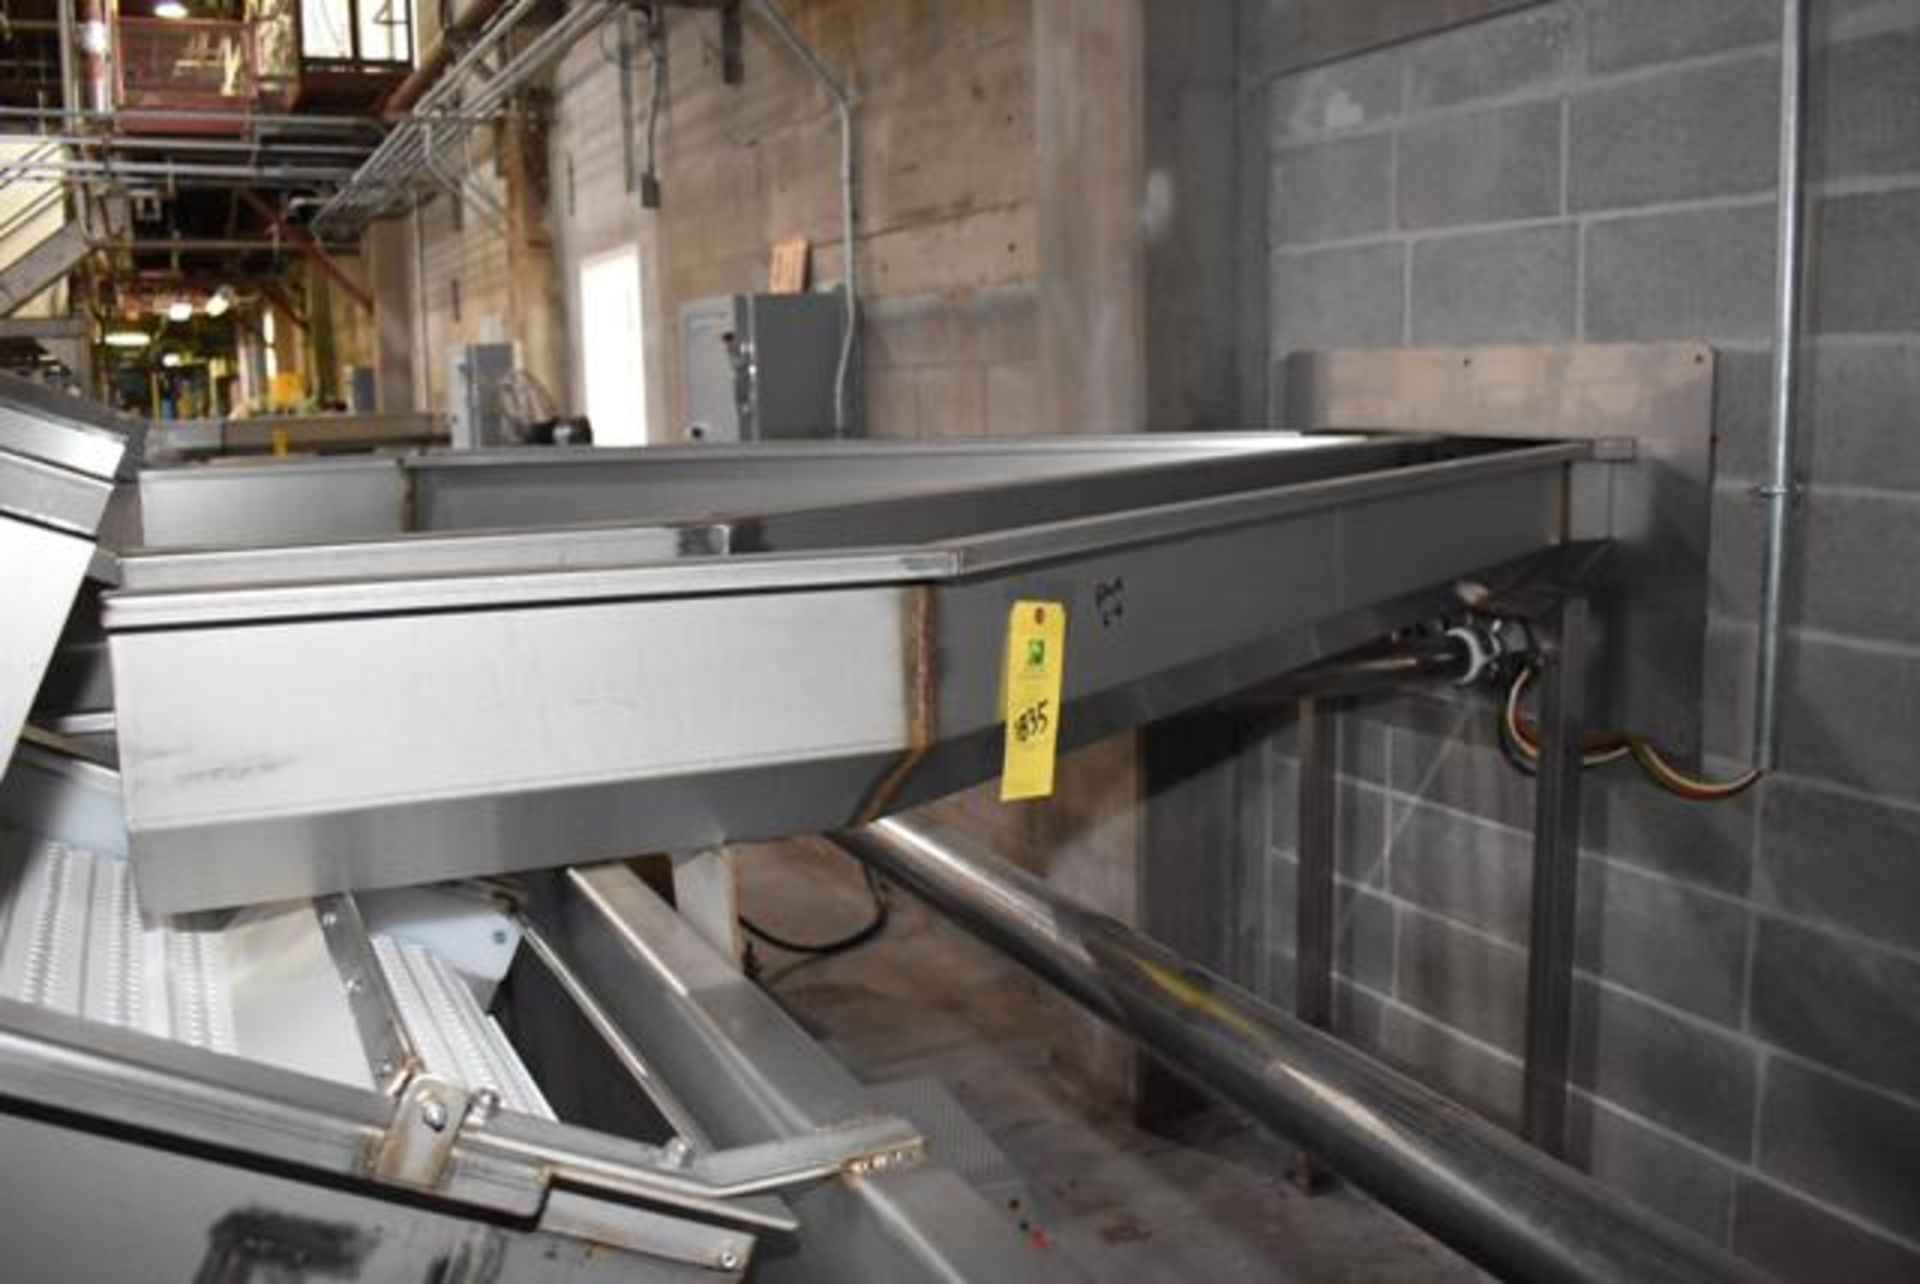 Line #4 - Cherry, Stainless Steel Flume, 12' Top x 5" Bottom x 9" Deep, RIGGING FEE: $300 - Image 2 of 3